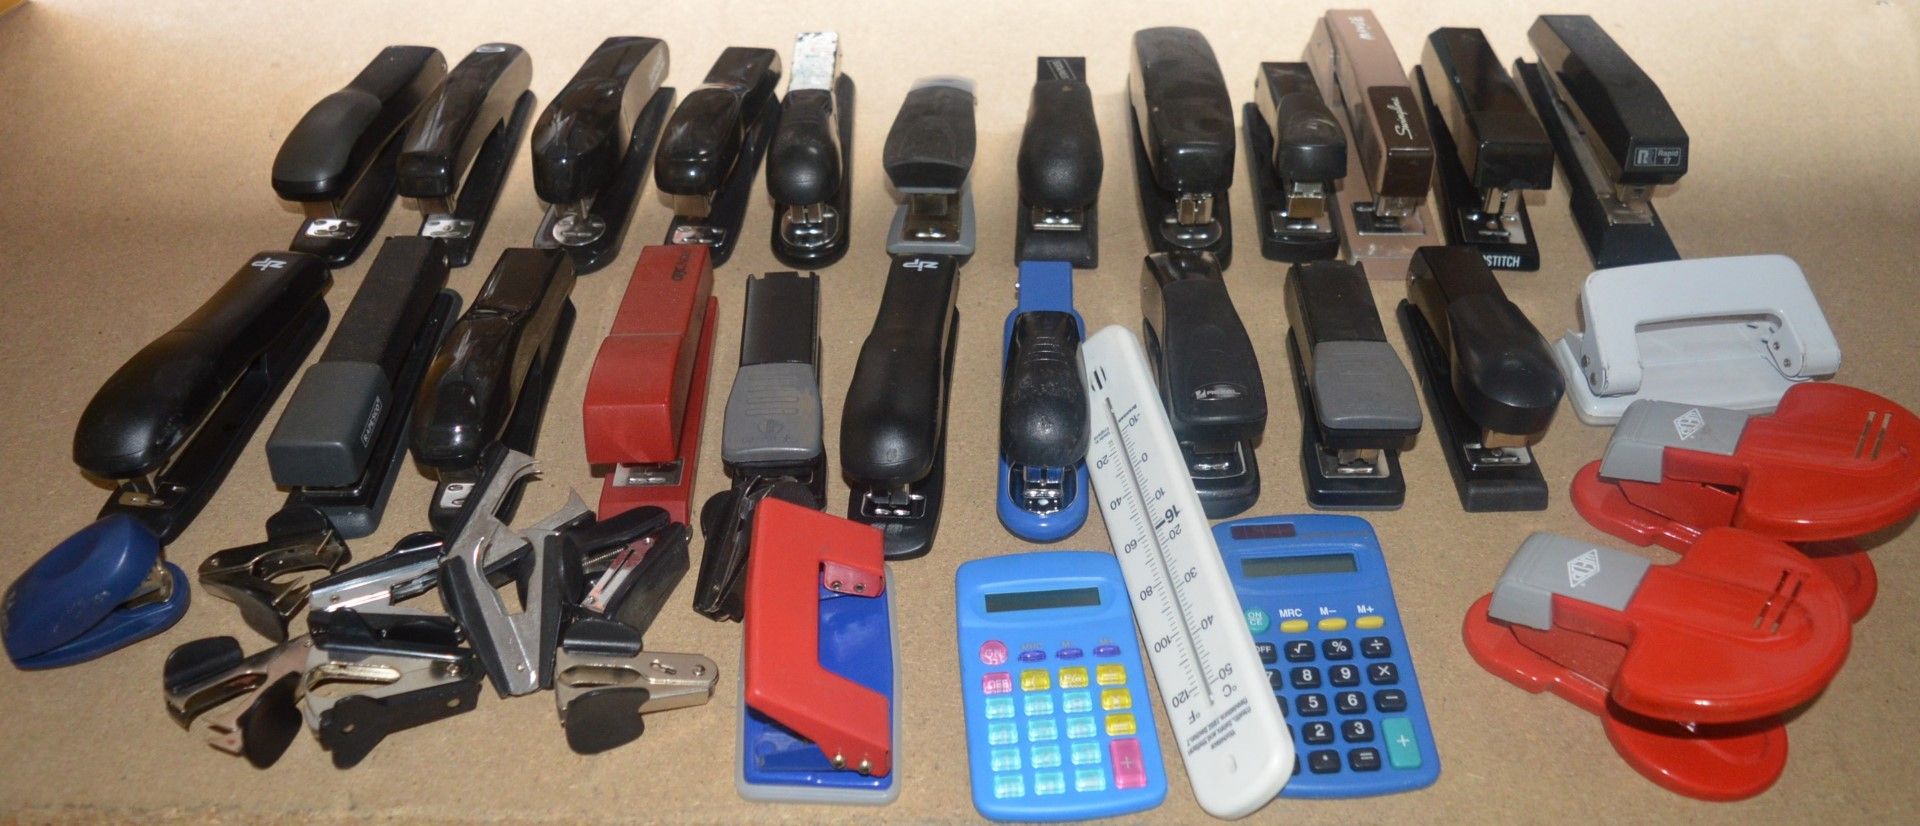 Approx 40 x Various Pieces of Office Stationary - Includes Staplers, Calculators, Hole Punches and